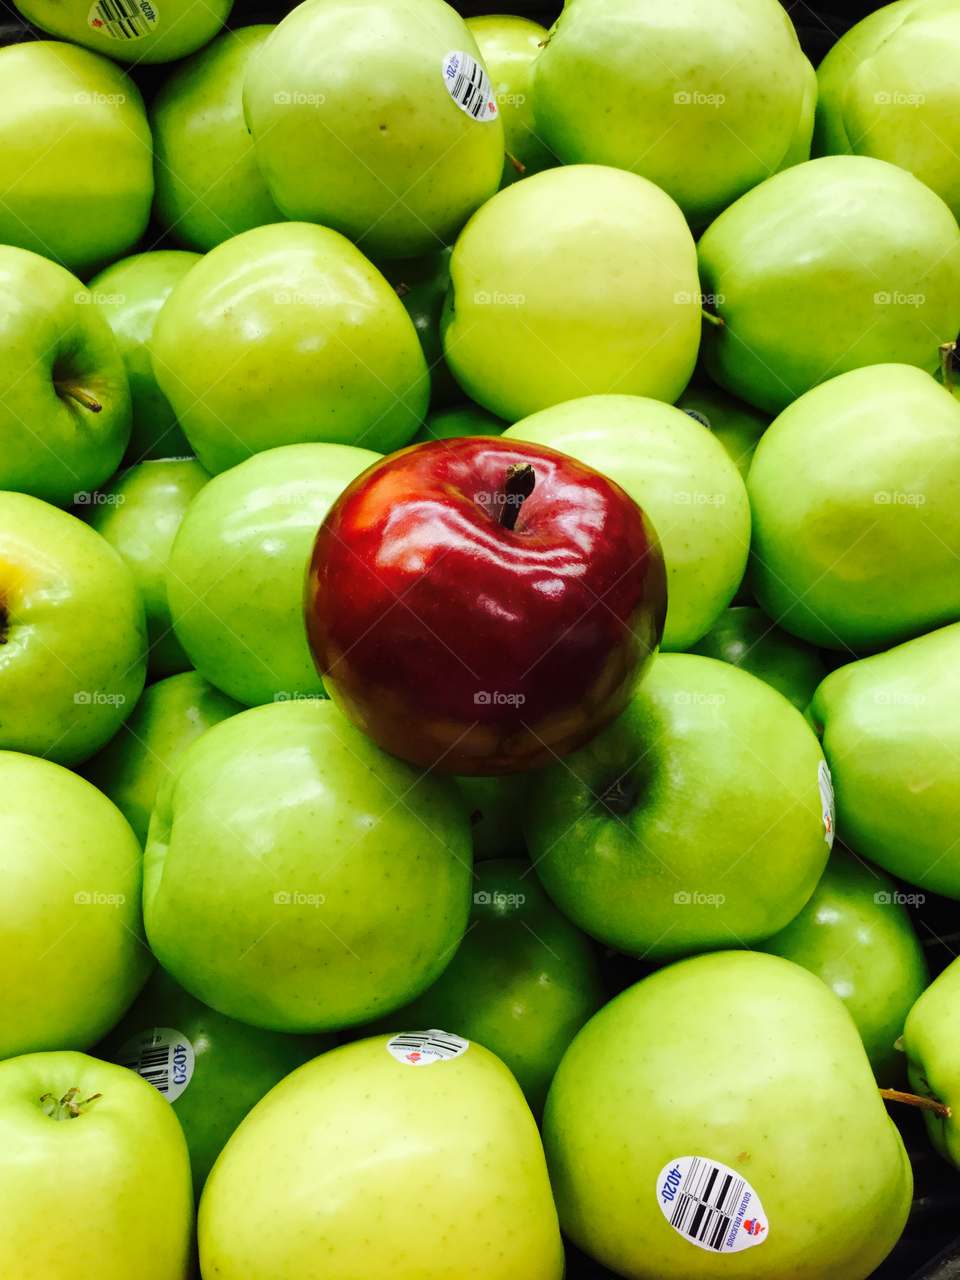 Red apple among the green apples.